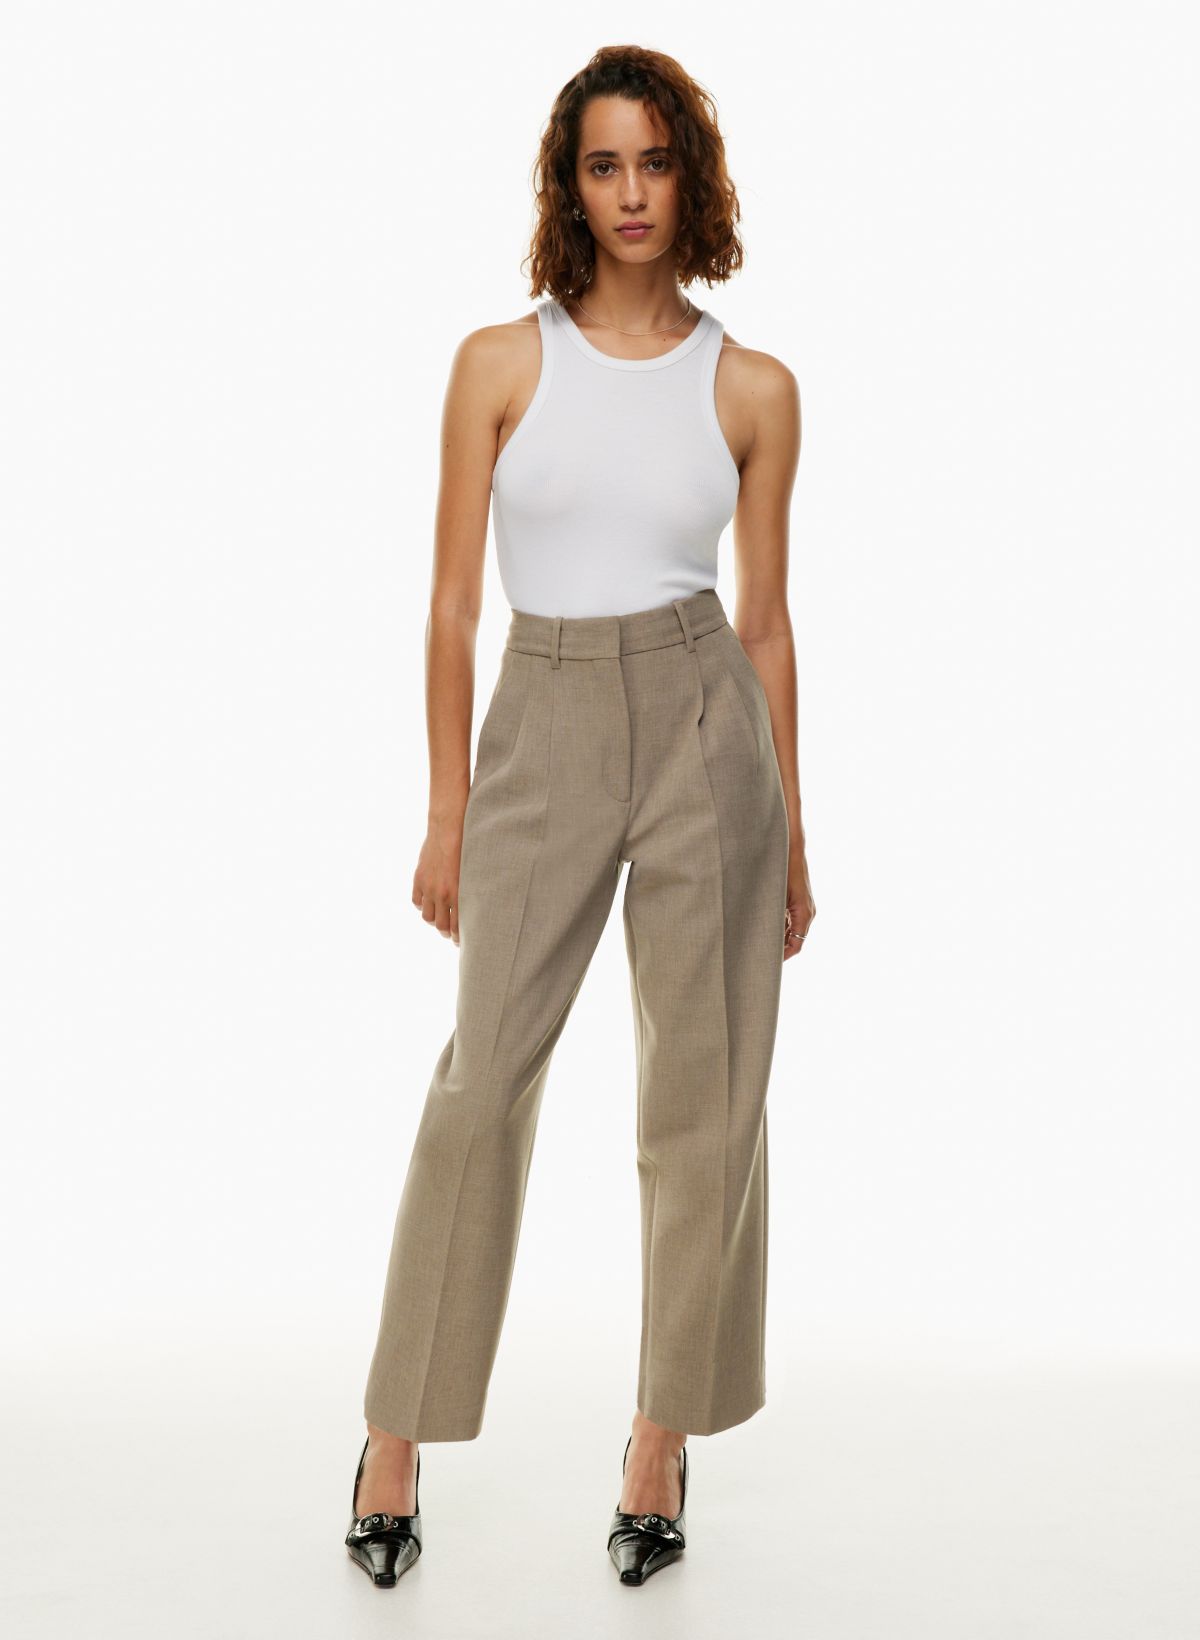 CARROT PANT  Carrot pants, Tapered trousers, Outfits